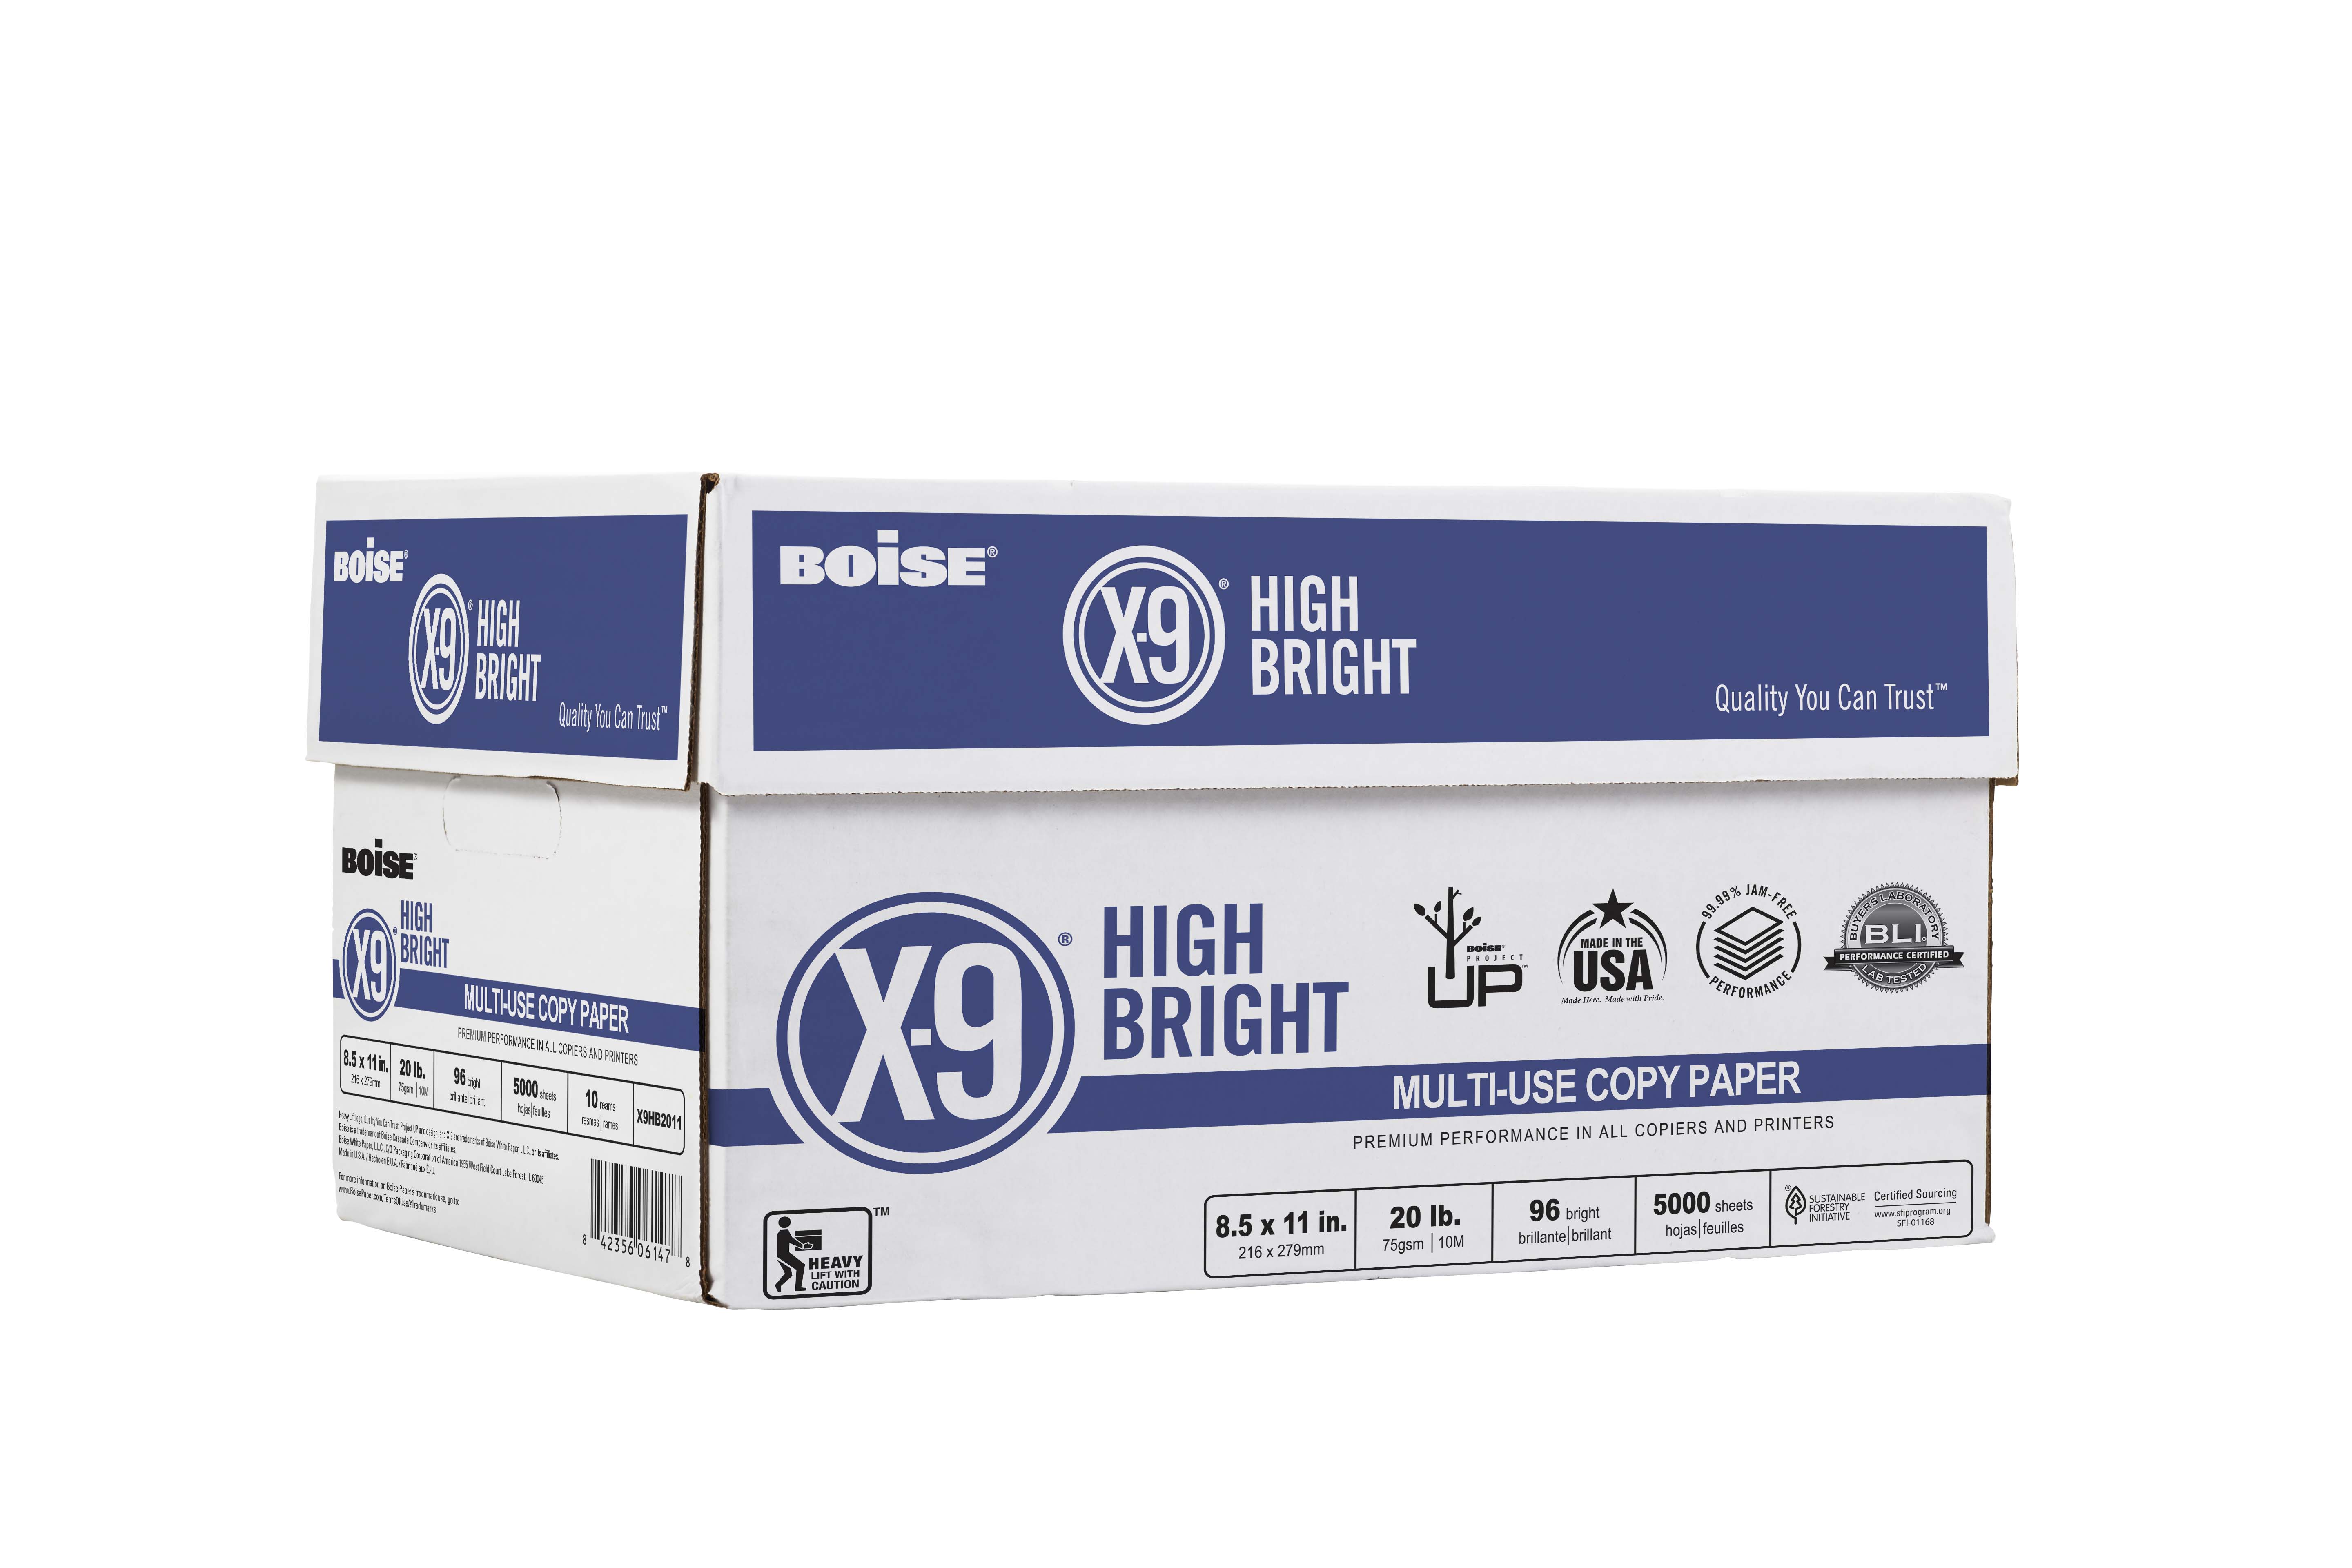 Euro 108 Ream of 500 Sheets Case of 10 Reams US /96 20 Lb 8 1/2 x 11 Brightness Letter Size Boise X-9 High Bright Multi-Use Copy Paper U.S. 